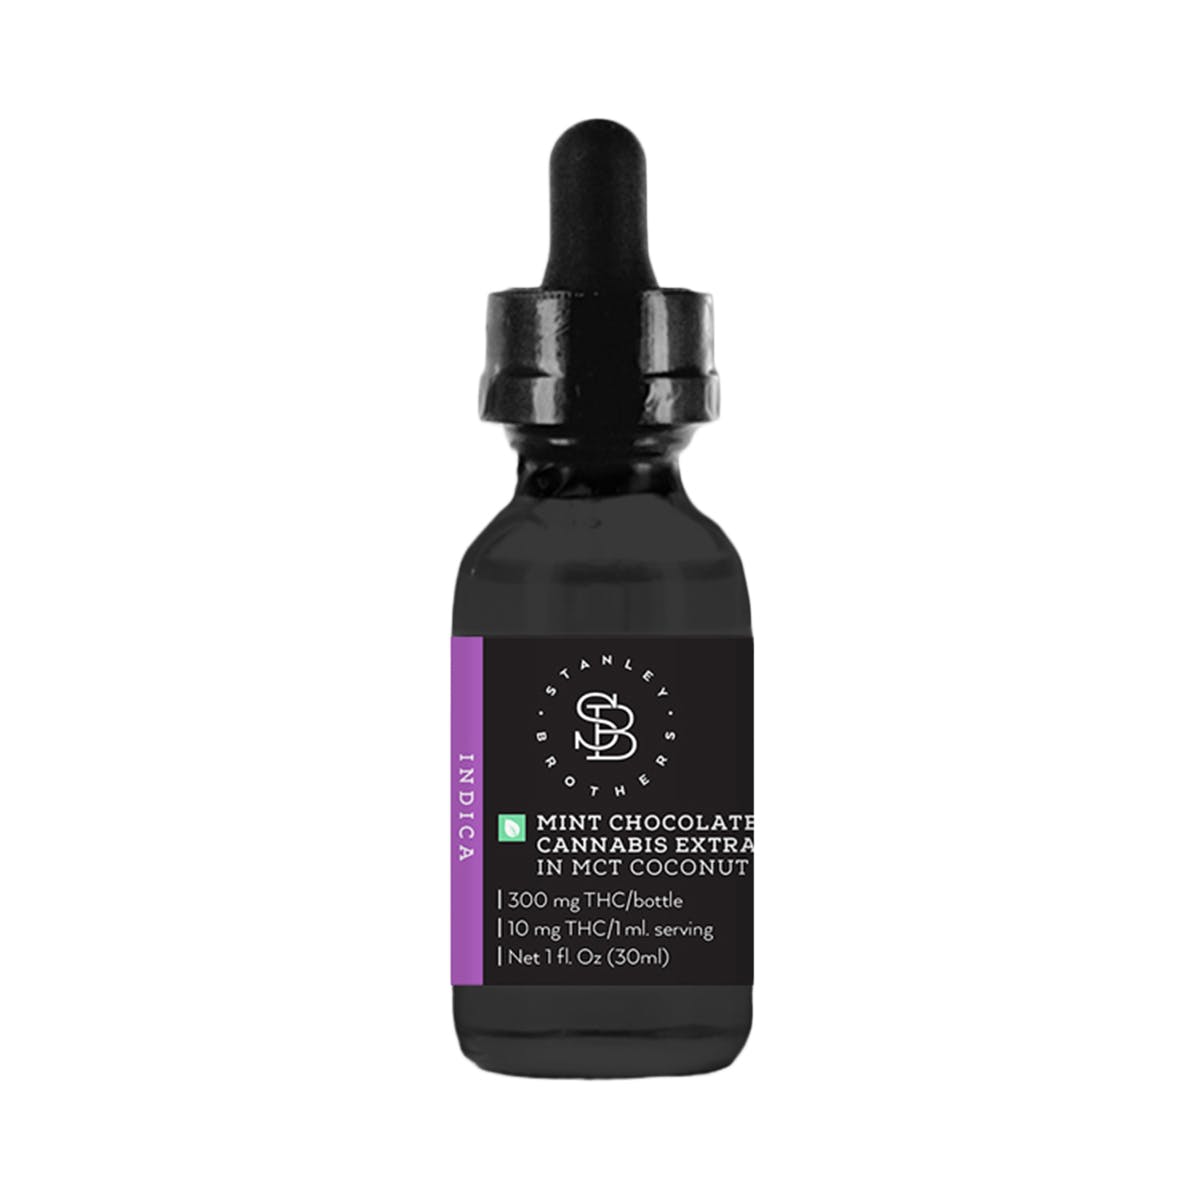 marijuana-dispensaries-natural-alternatives-for-health-medical-in-fort-collins-sb-tincture-mint-chocolate-indica-300mg-thc-med